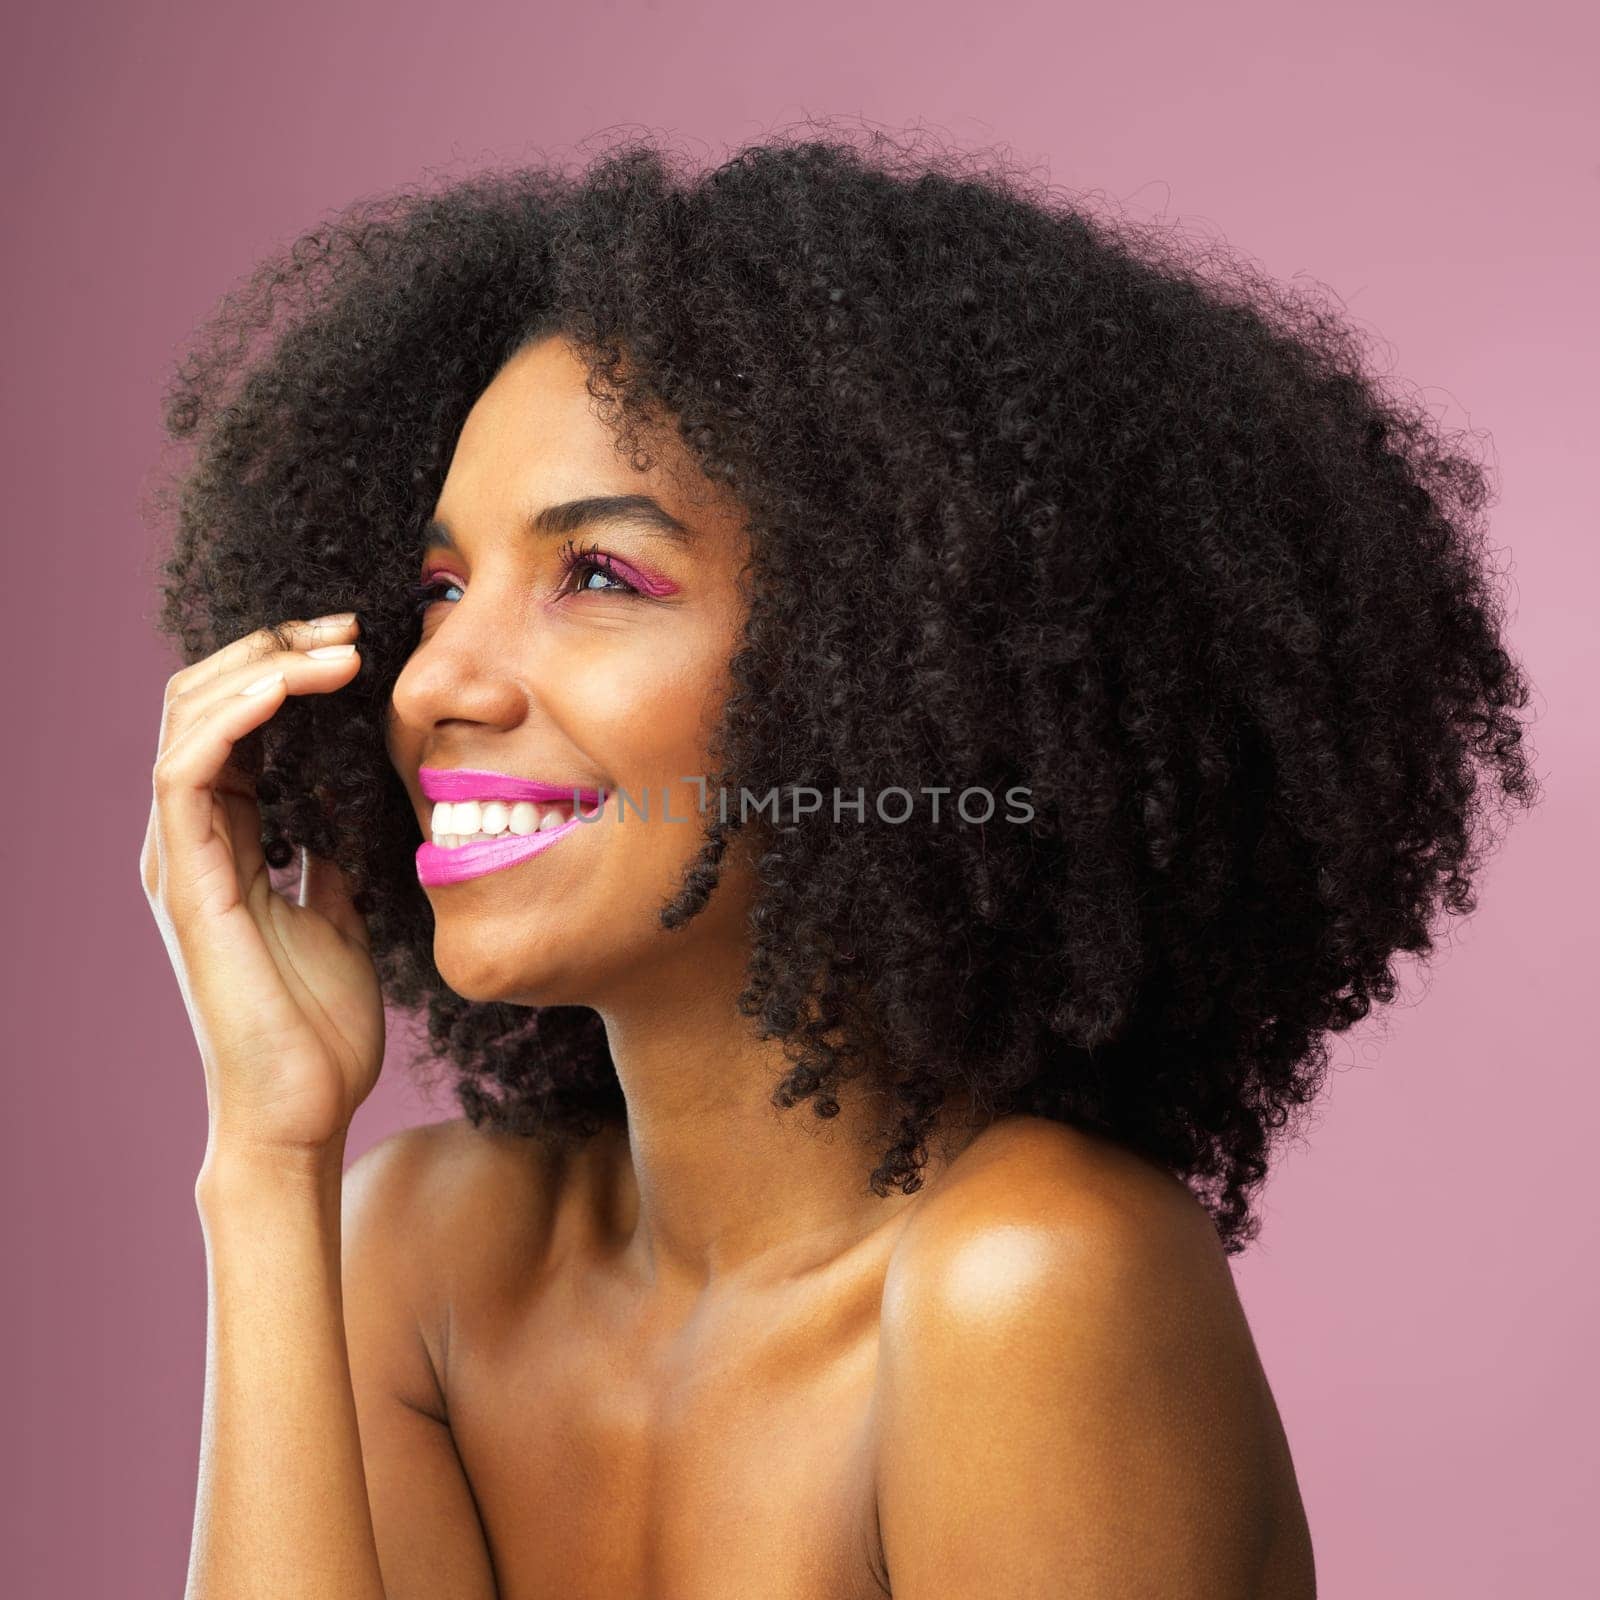 No beauty shines brighter than happiness. Studio shot of an attractive young woman posing against a pink background